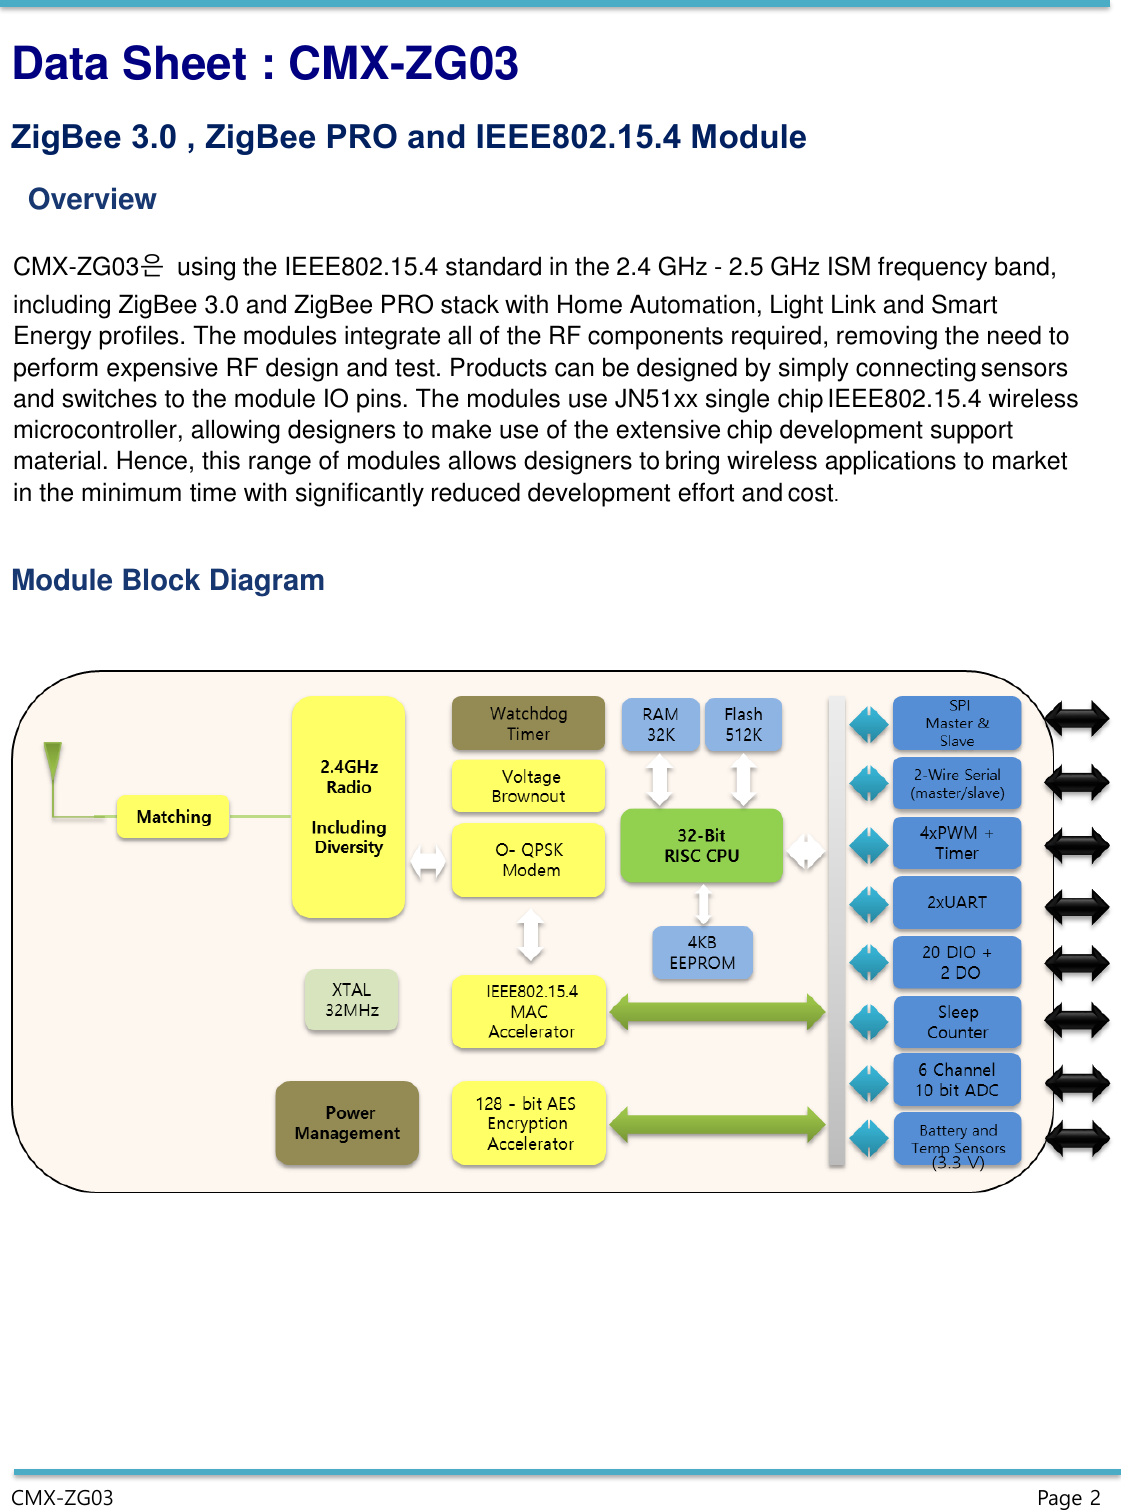 CMX-ZG03  Page 2 Data Sheet : CMX-ZG03 ZigBee 3.0 , ZigBee PRO and IEEE802.15.4 Module Overview CMX-ZG03은  using the IEEE802.15.4 standard in the 2.4 GHz - 2.5 GHz ISM frequency band, including ZigBee 3.0 and ZigBee PRO stack with Home Automation, Light Link and Smart Energy profiles. The modules integrate all of the RF components required, removing the need to perform expensive RF design and test. Products can be designed by simply connecting sensors and switches to the module IO pins. The modules use JN51xx single chip IEEE802.15.4 wireless microcontroller, allowing designers to make use of the extensive chip development support material. Hence, this range of modules allows designers to bring wireless applications to market in the minimum time with significantly reduced development effort and cost. Module Block Diagram 